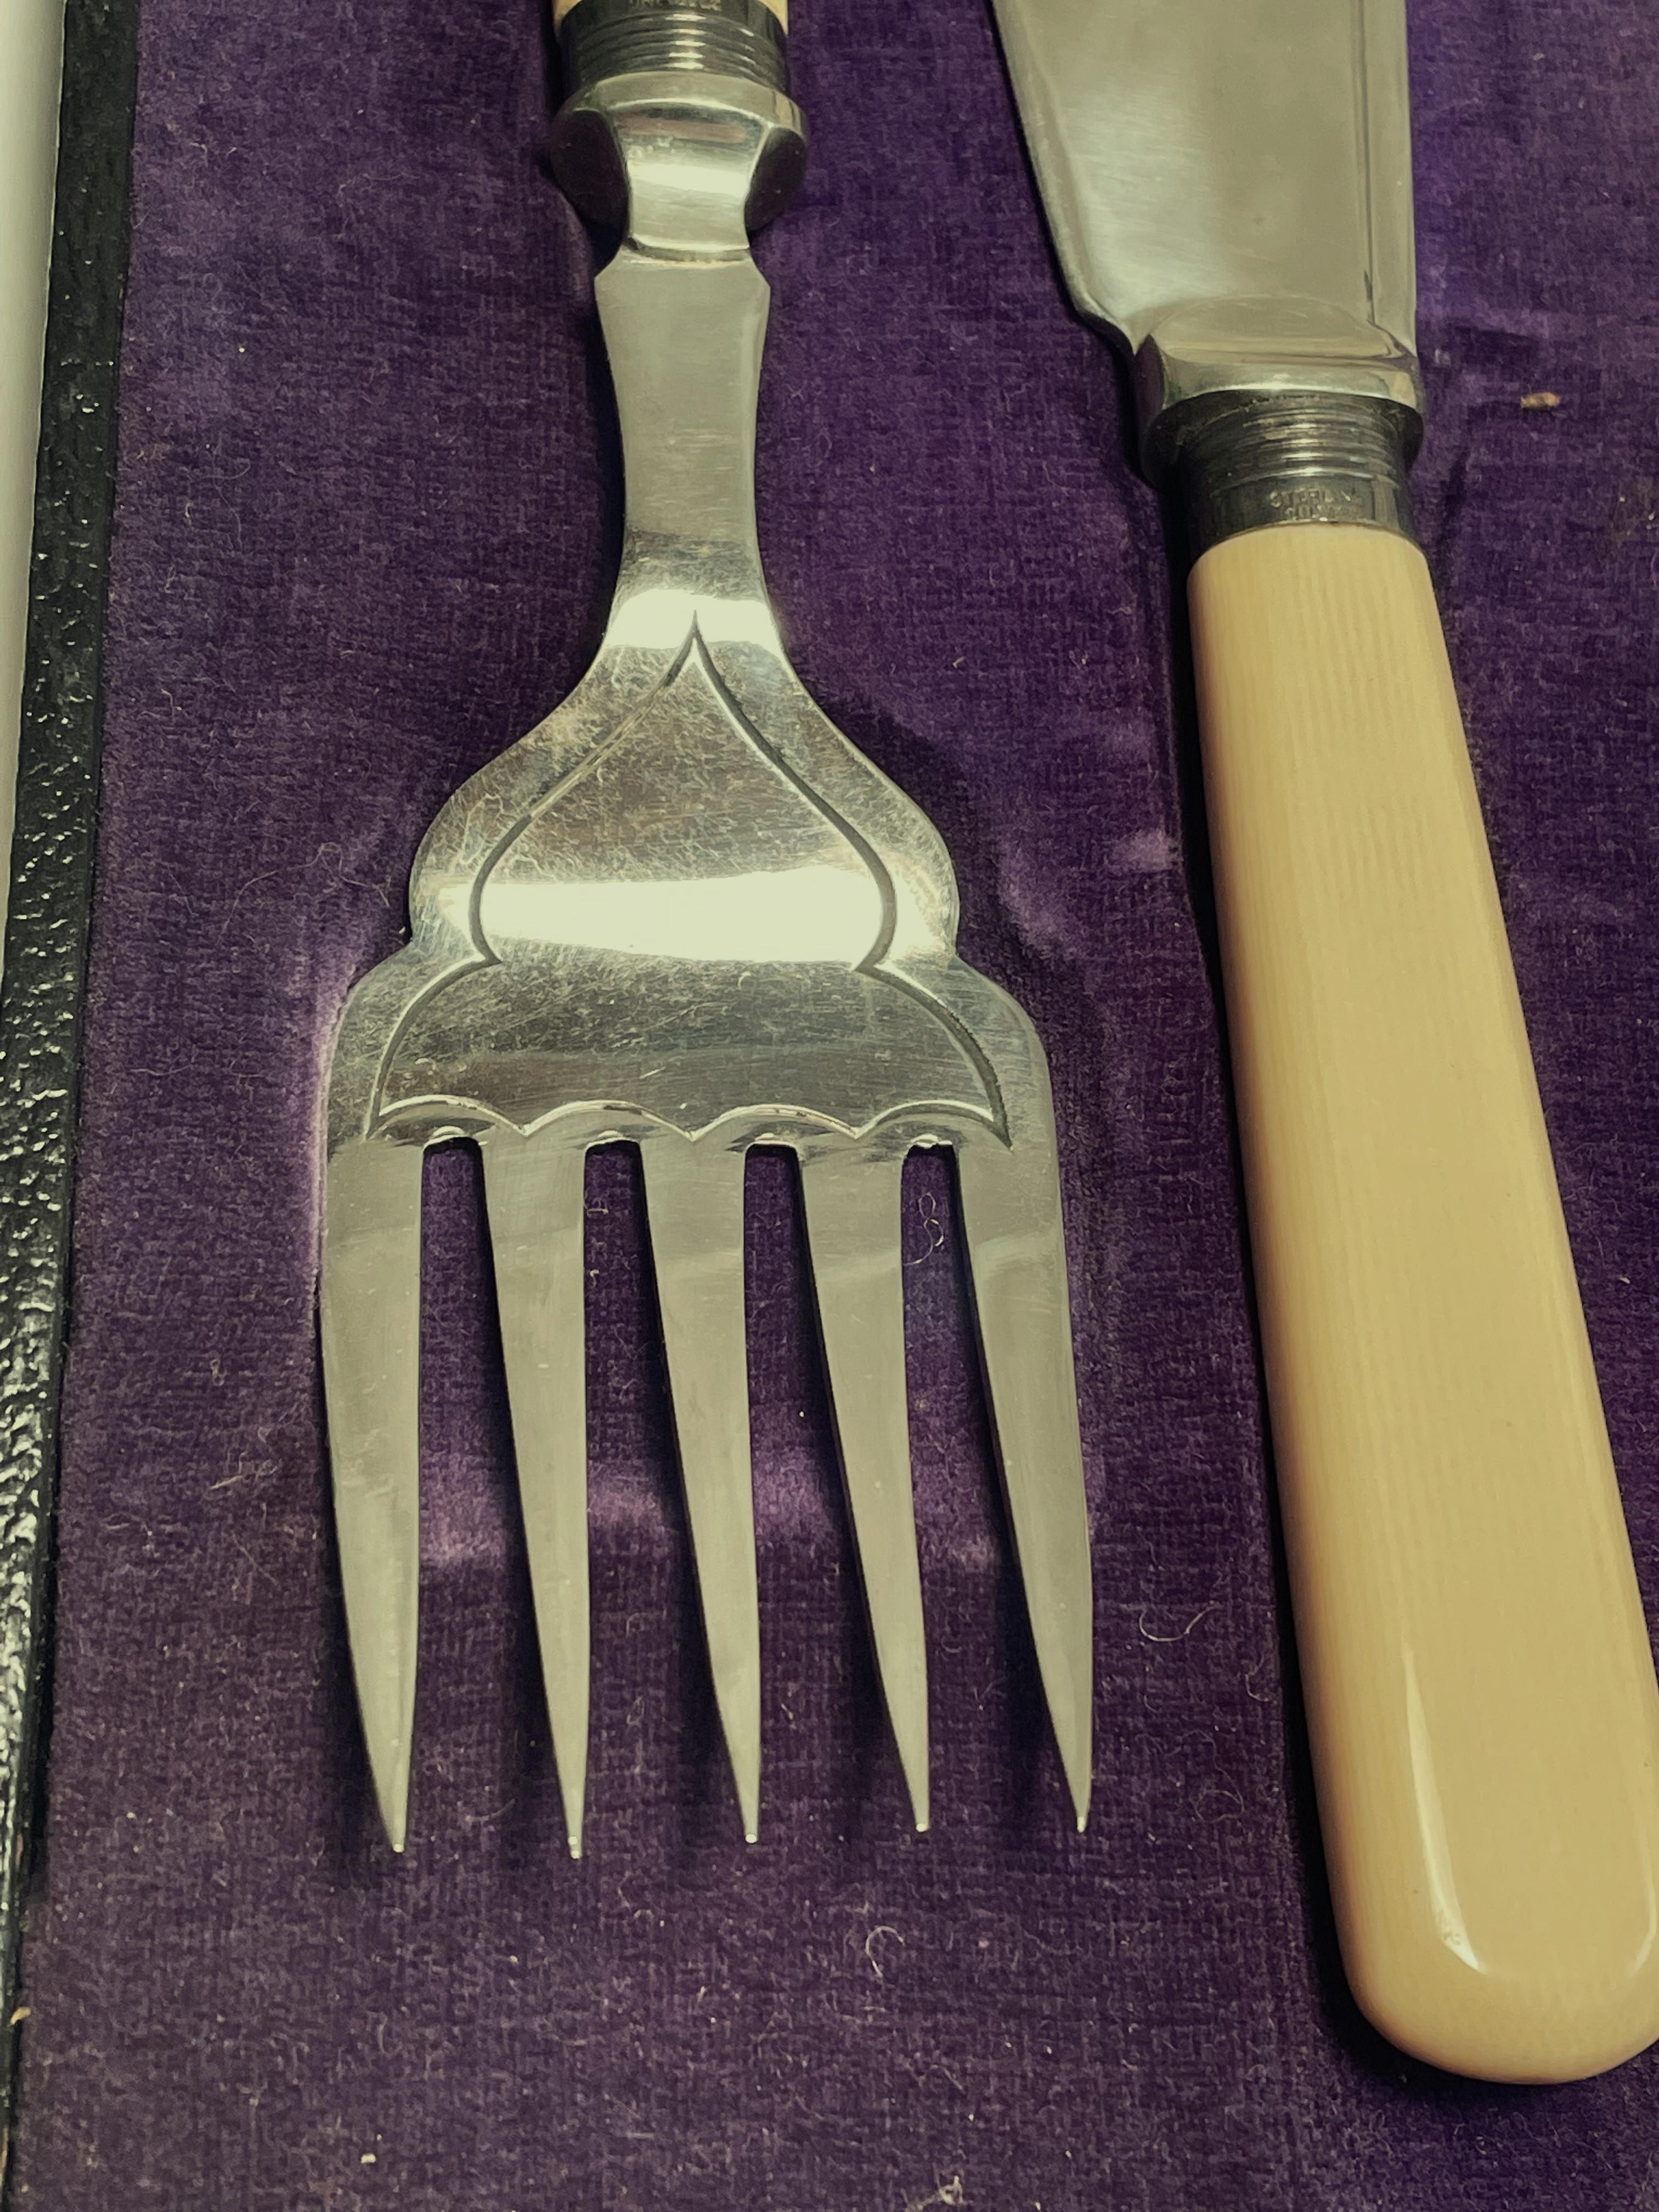 Here is an elegant fish serving knife and fork set with celluloid (early plastic) handles, a sterling silver band on each piece (which I have not polished) and stainless steel knife blade and fork. The set is in nice condition in the original box